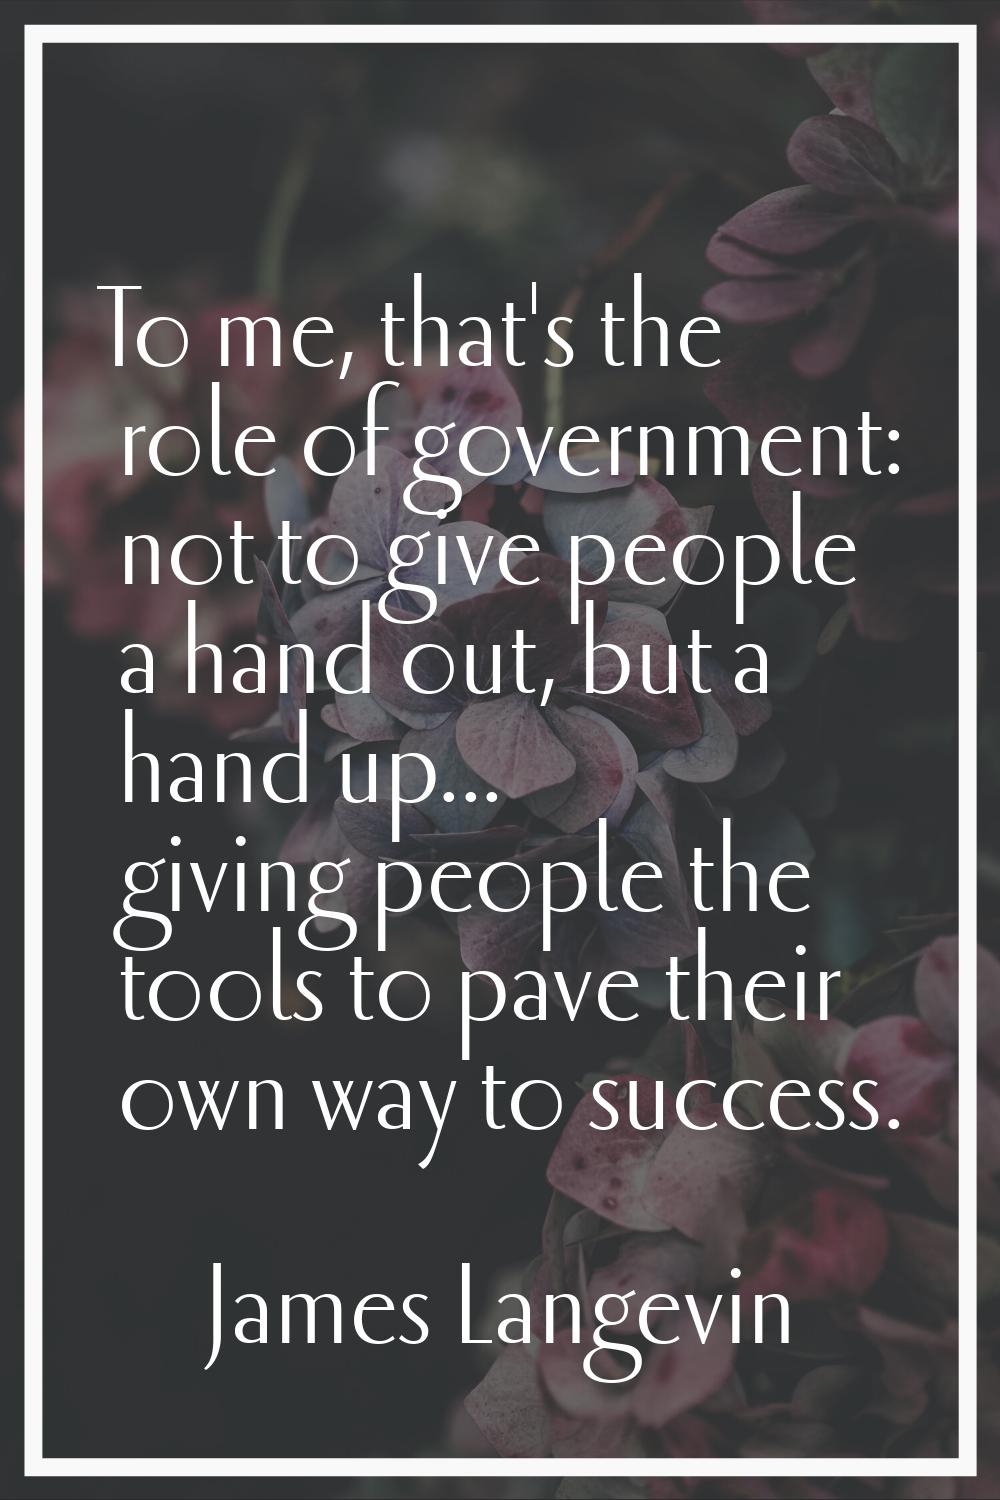 To me, that's the role of government: not to give people a hand out, but a hand up... giving people